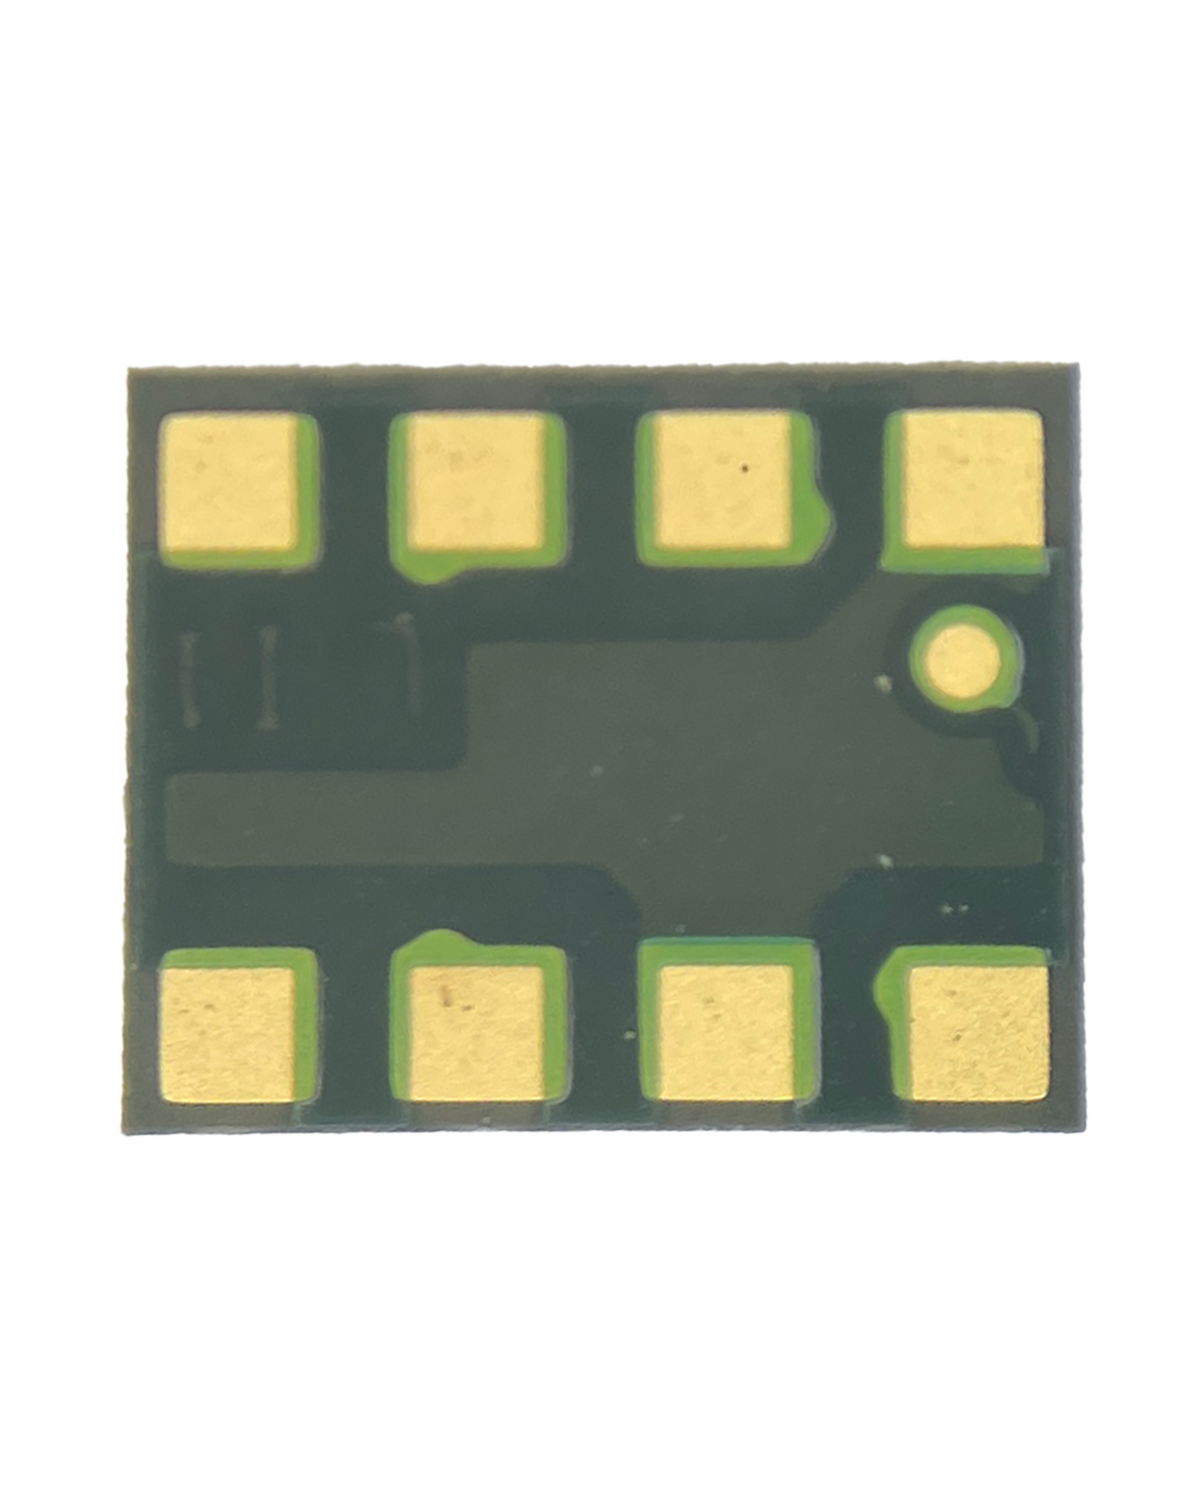 PRESSURE IC COMPATIBLE WITH IPHONE 6 / 6 PLUS (U2204: BMP282AC: BMP282: 8 PINS)